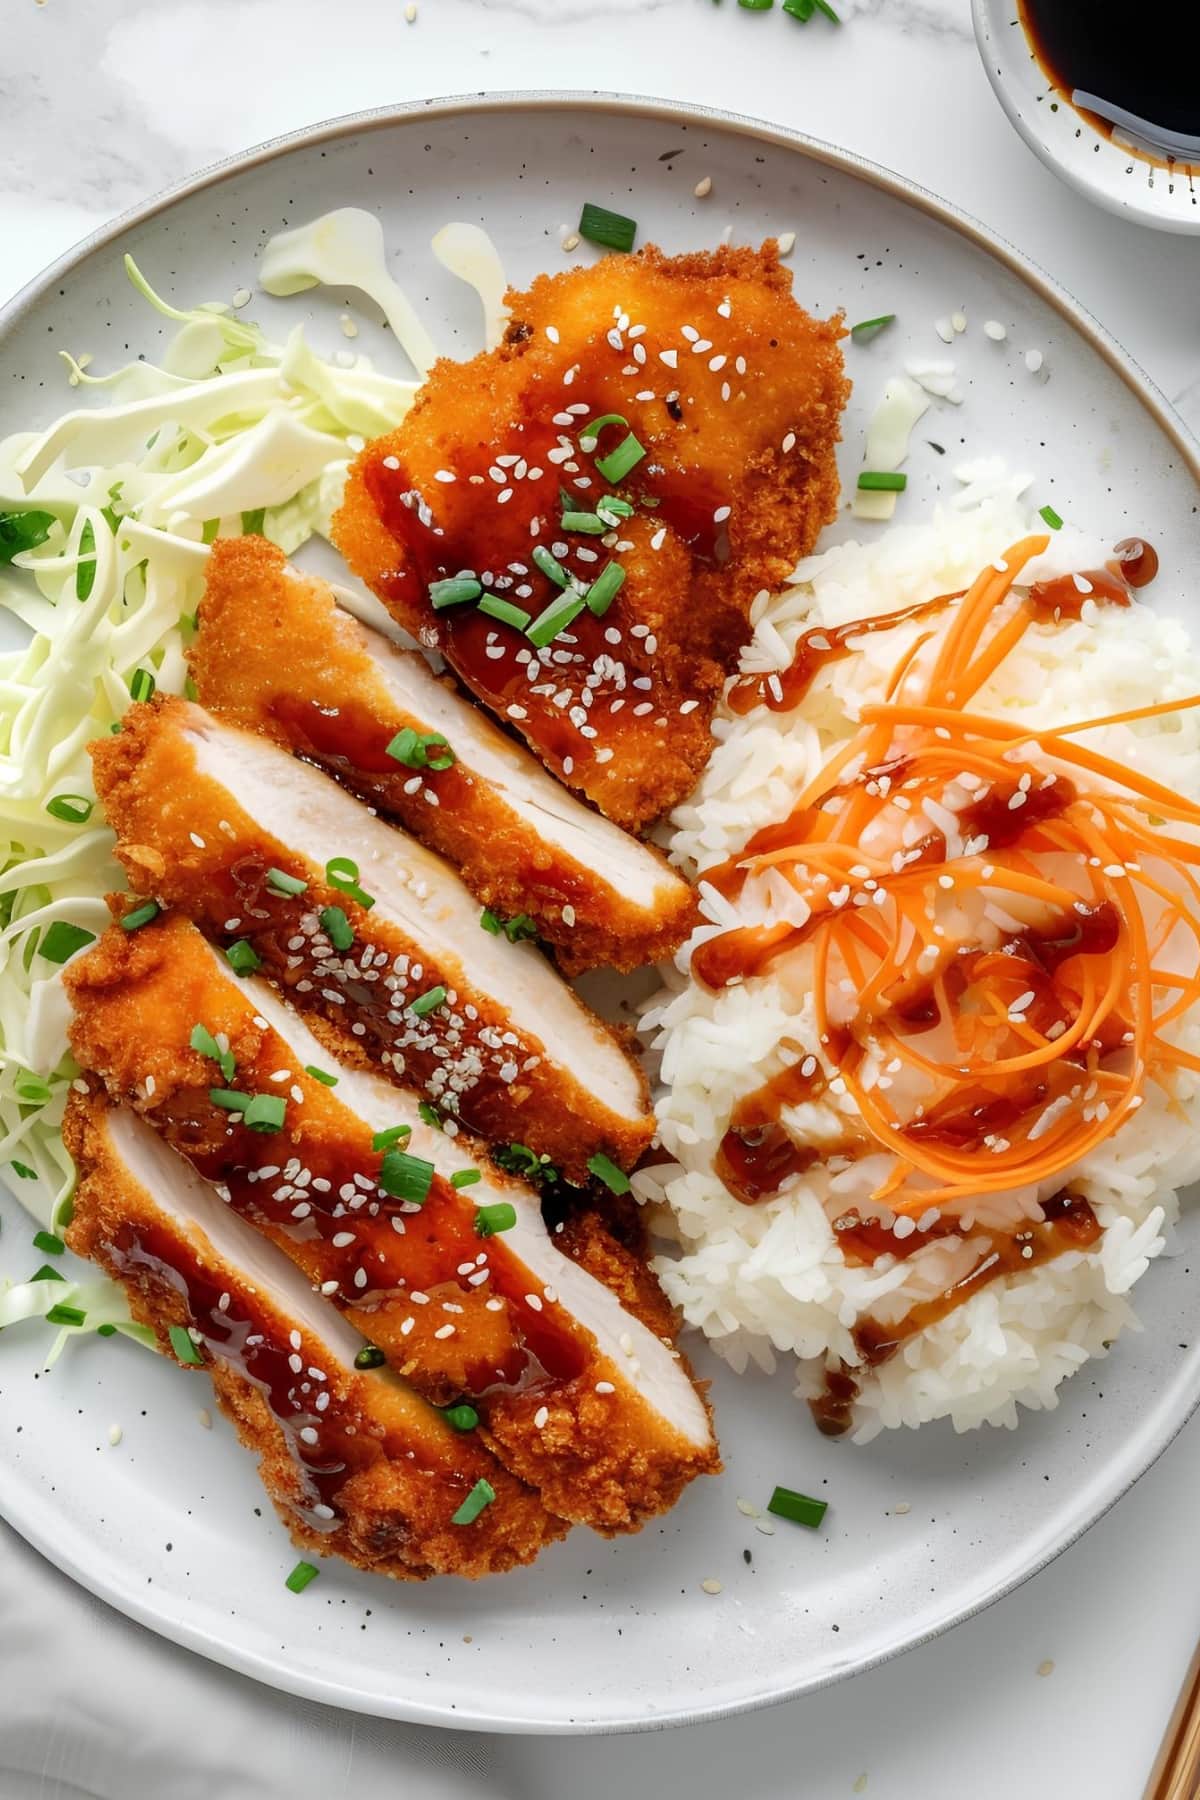 Chicken katsu served with rice and cabbage salad